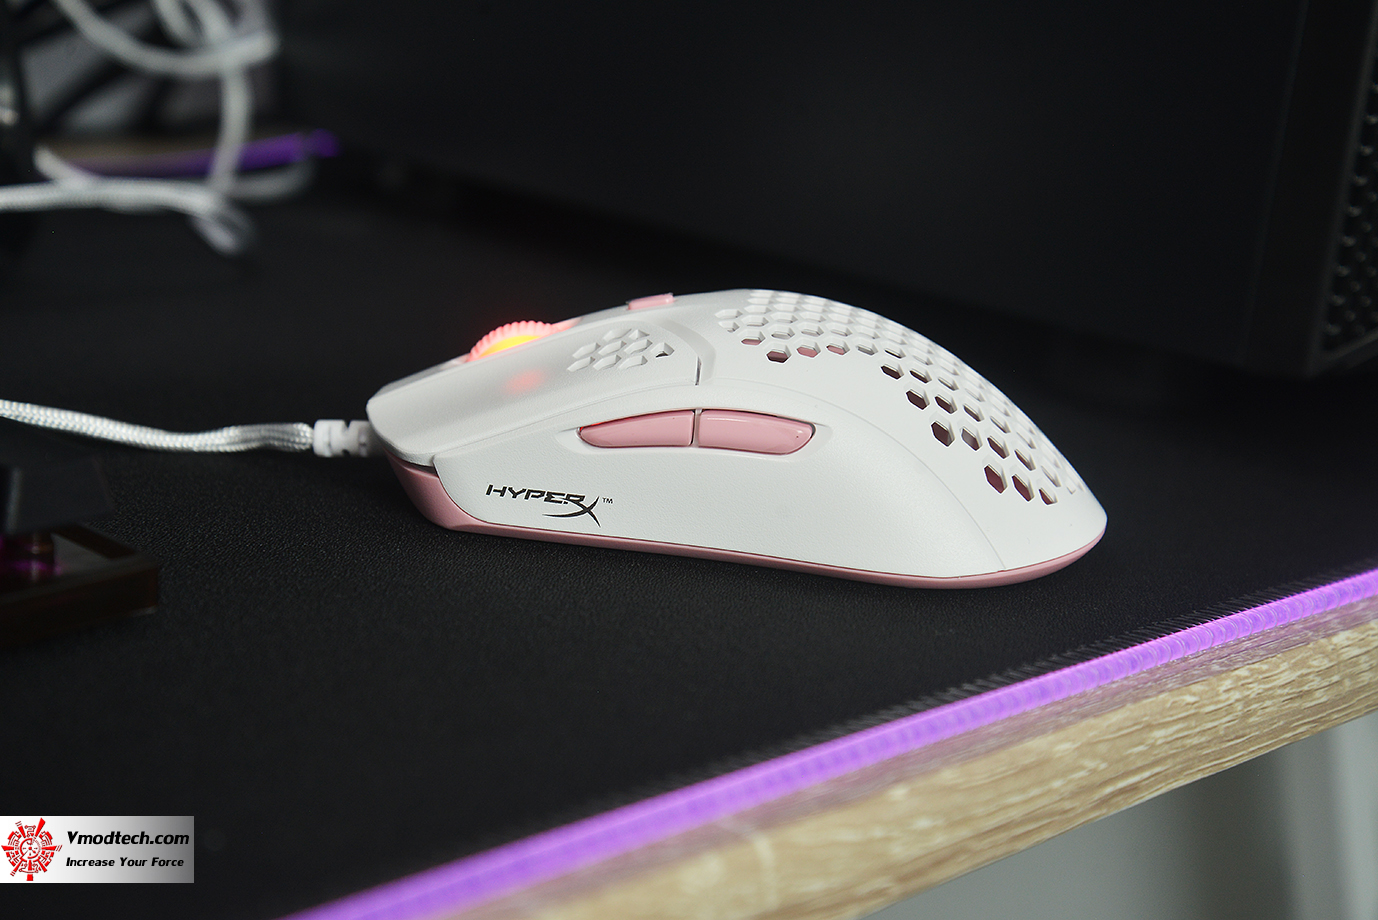 dsc 6199 HyperX Pulsefire Haste Pink Lightweight Gaming Mouse Review 